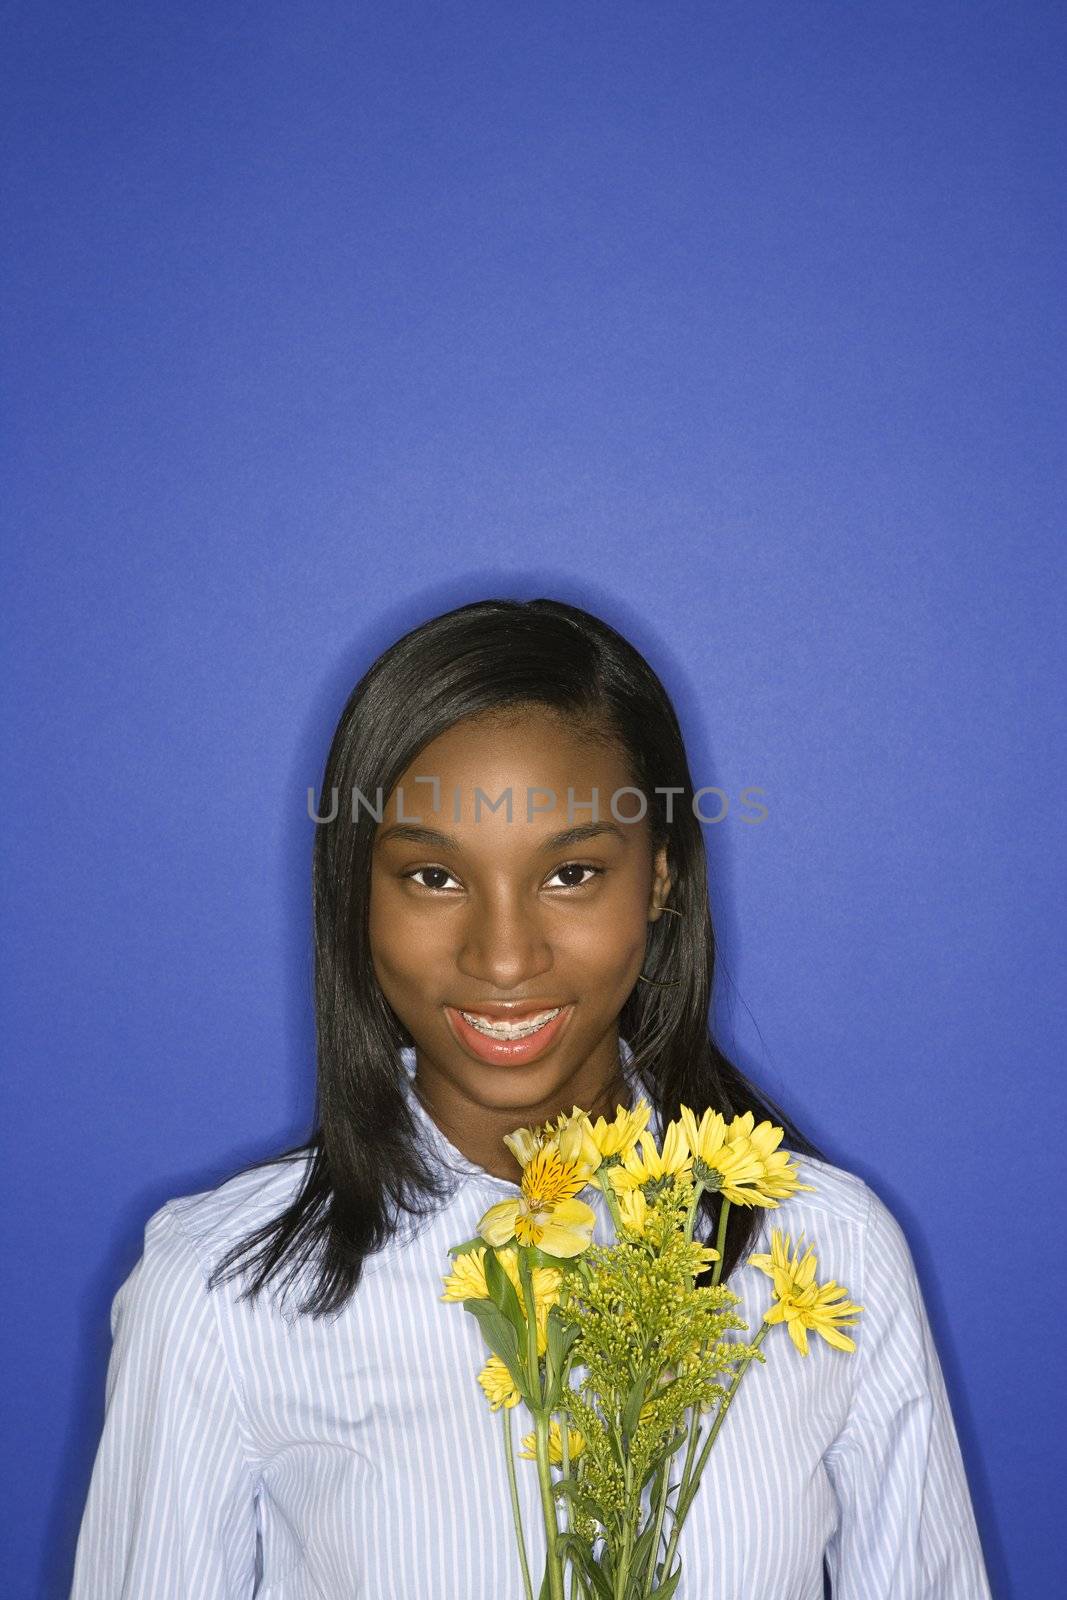 Portrait of smiling African-American teen girl with bouquet of yellow flowers in front of blue background.